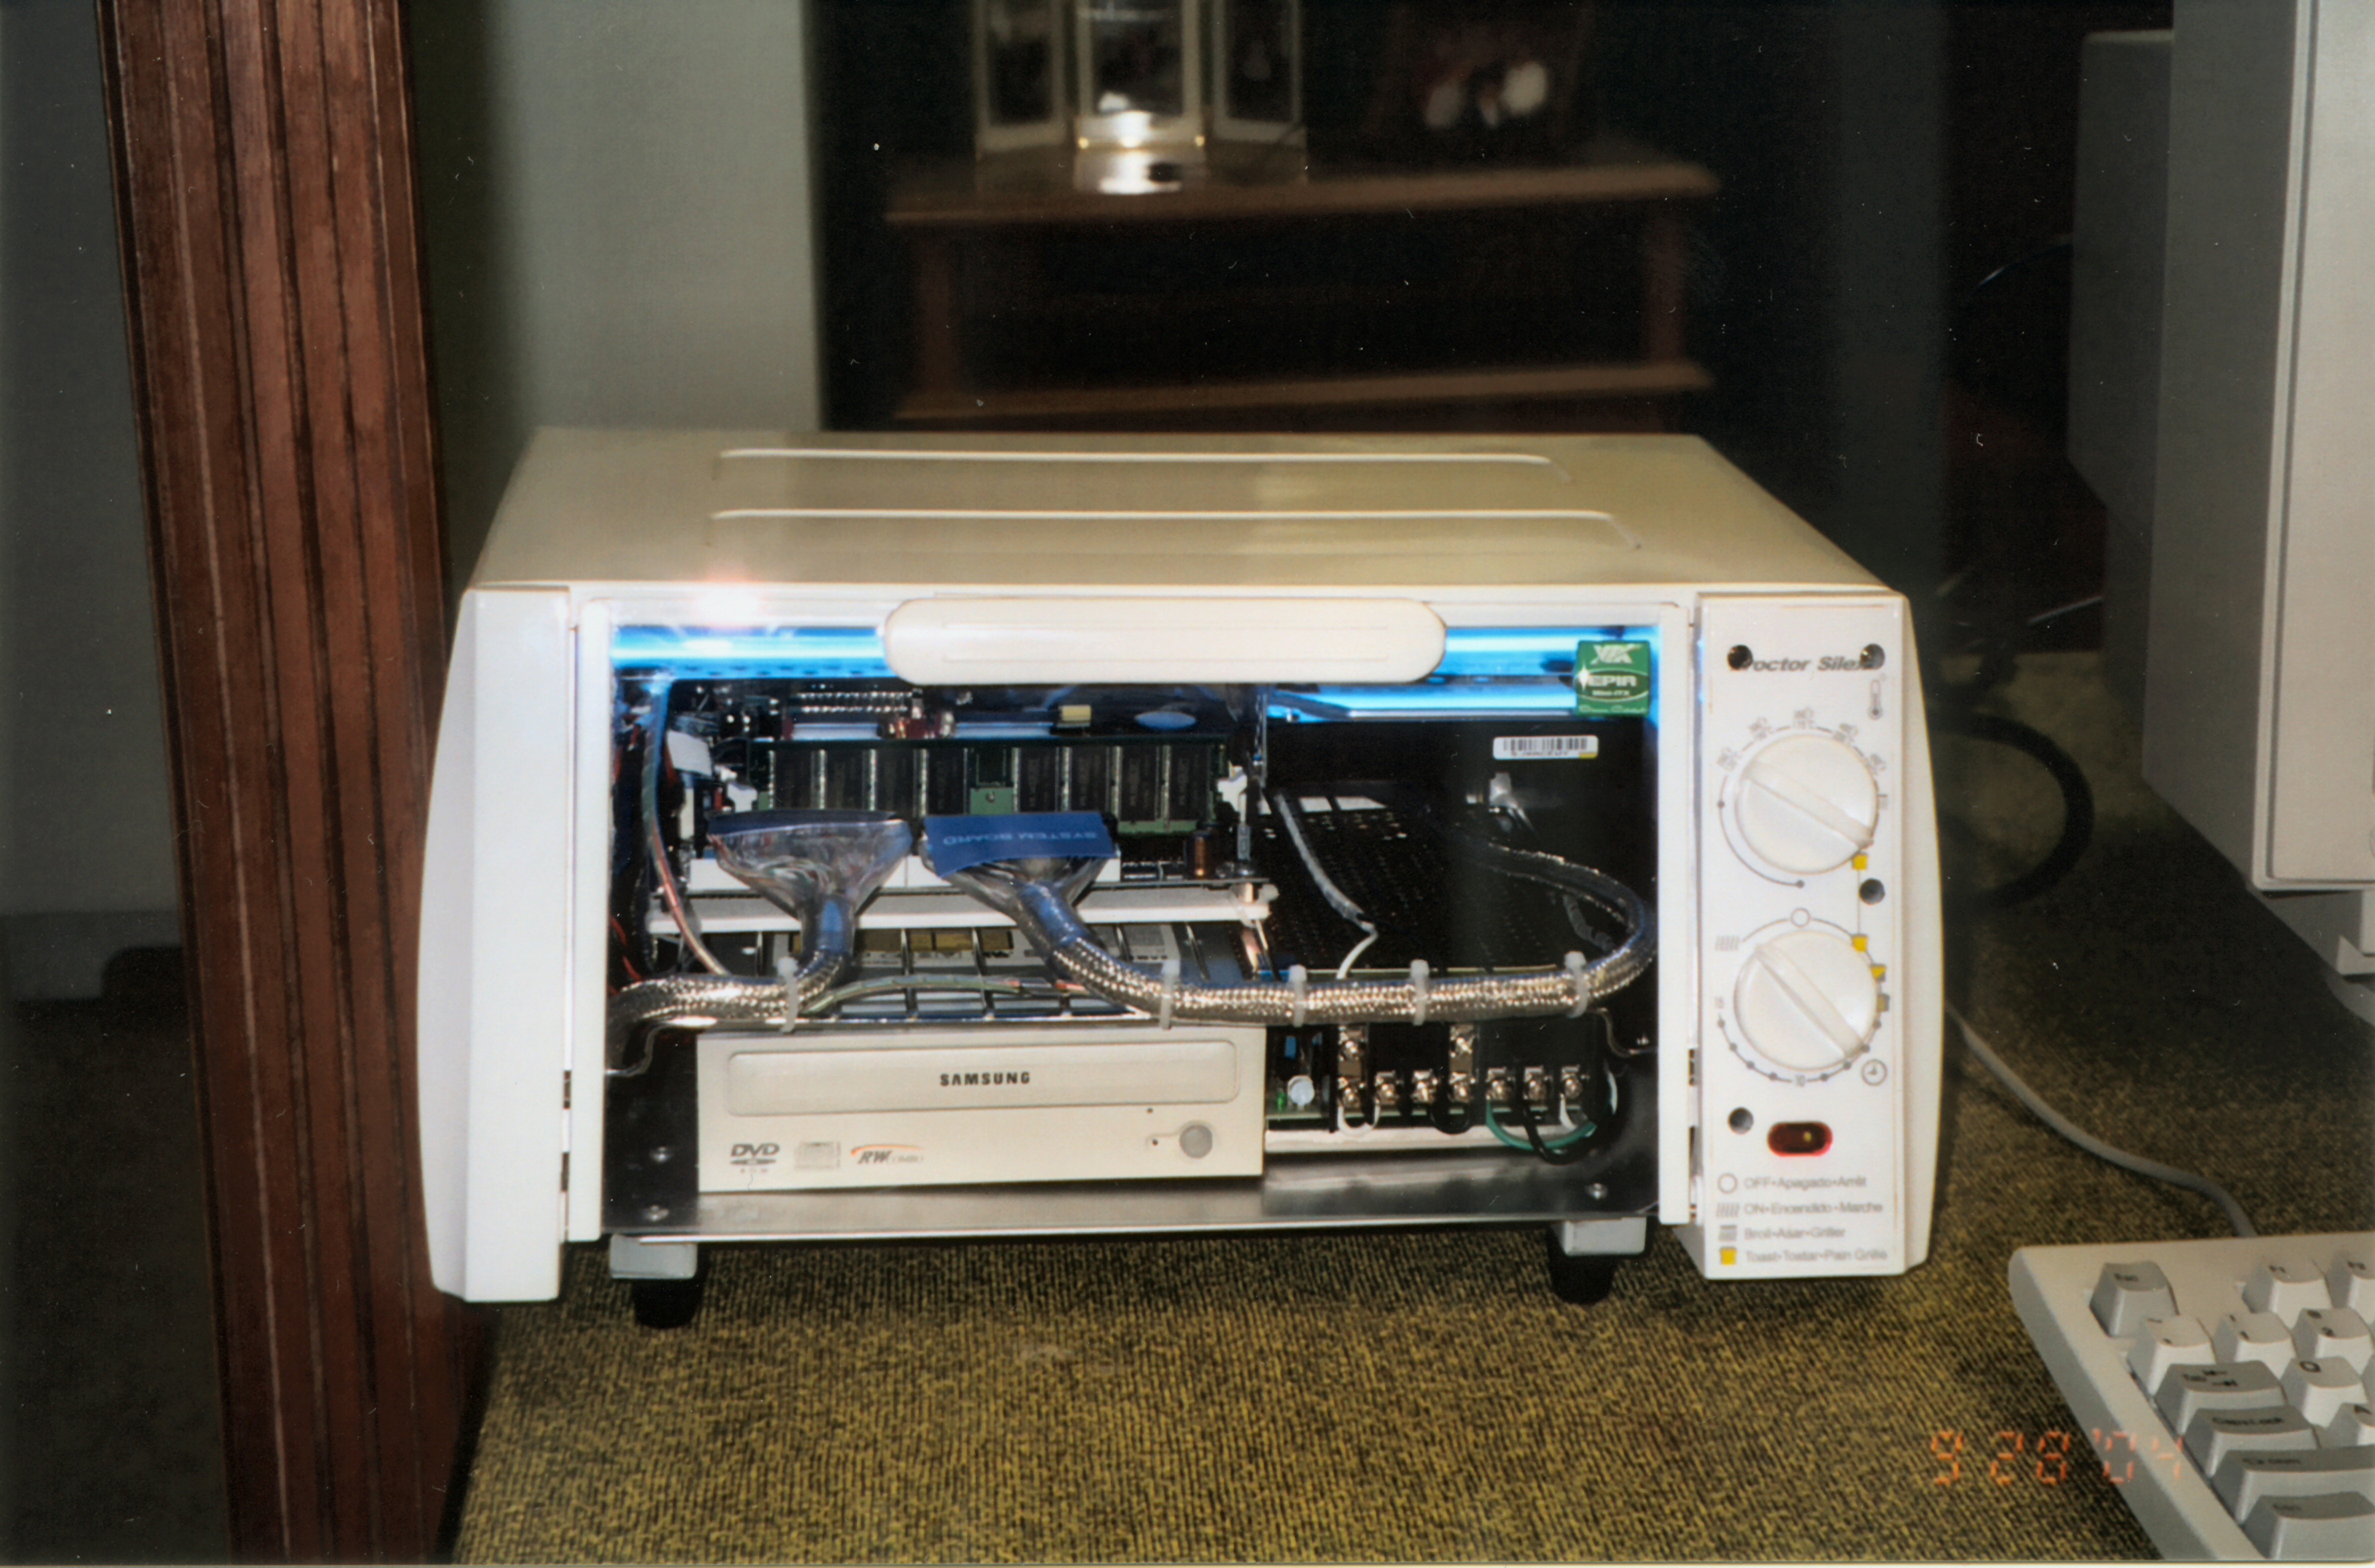 A frontal shot of the computer.